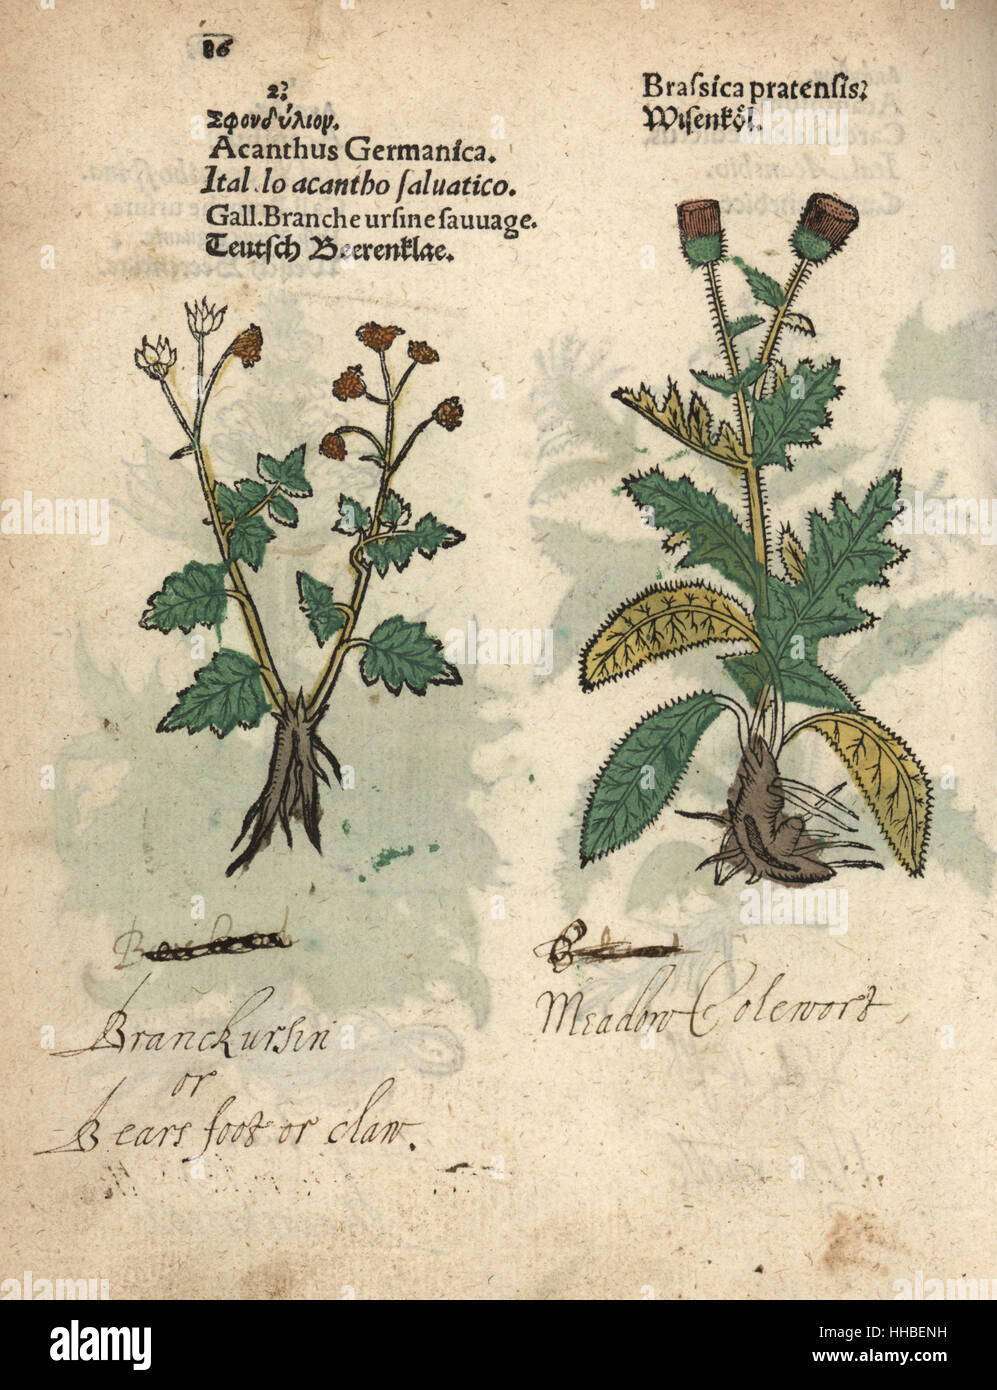 Cow parsnip, Heracleum sphondylium, and creeping thistle, Cirsium arvense. Handcoloured woodblock engraving of a botanical illustration from Adam Lonicer's Krauterbuch, or Herbal, Frankfurt, 1557. This from a 17th century pirate edition or atlas of illustrations only, with captions in Latin, Greek, French, Italian, German, and in English manuscript. Stock Photo